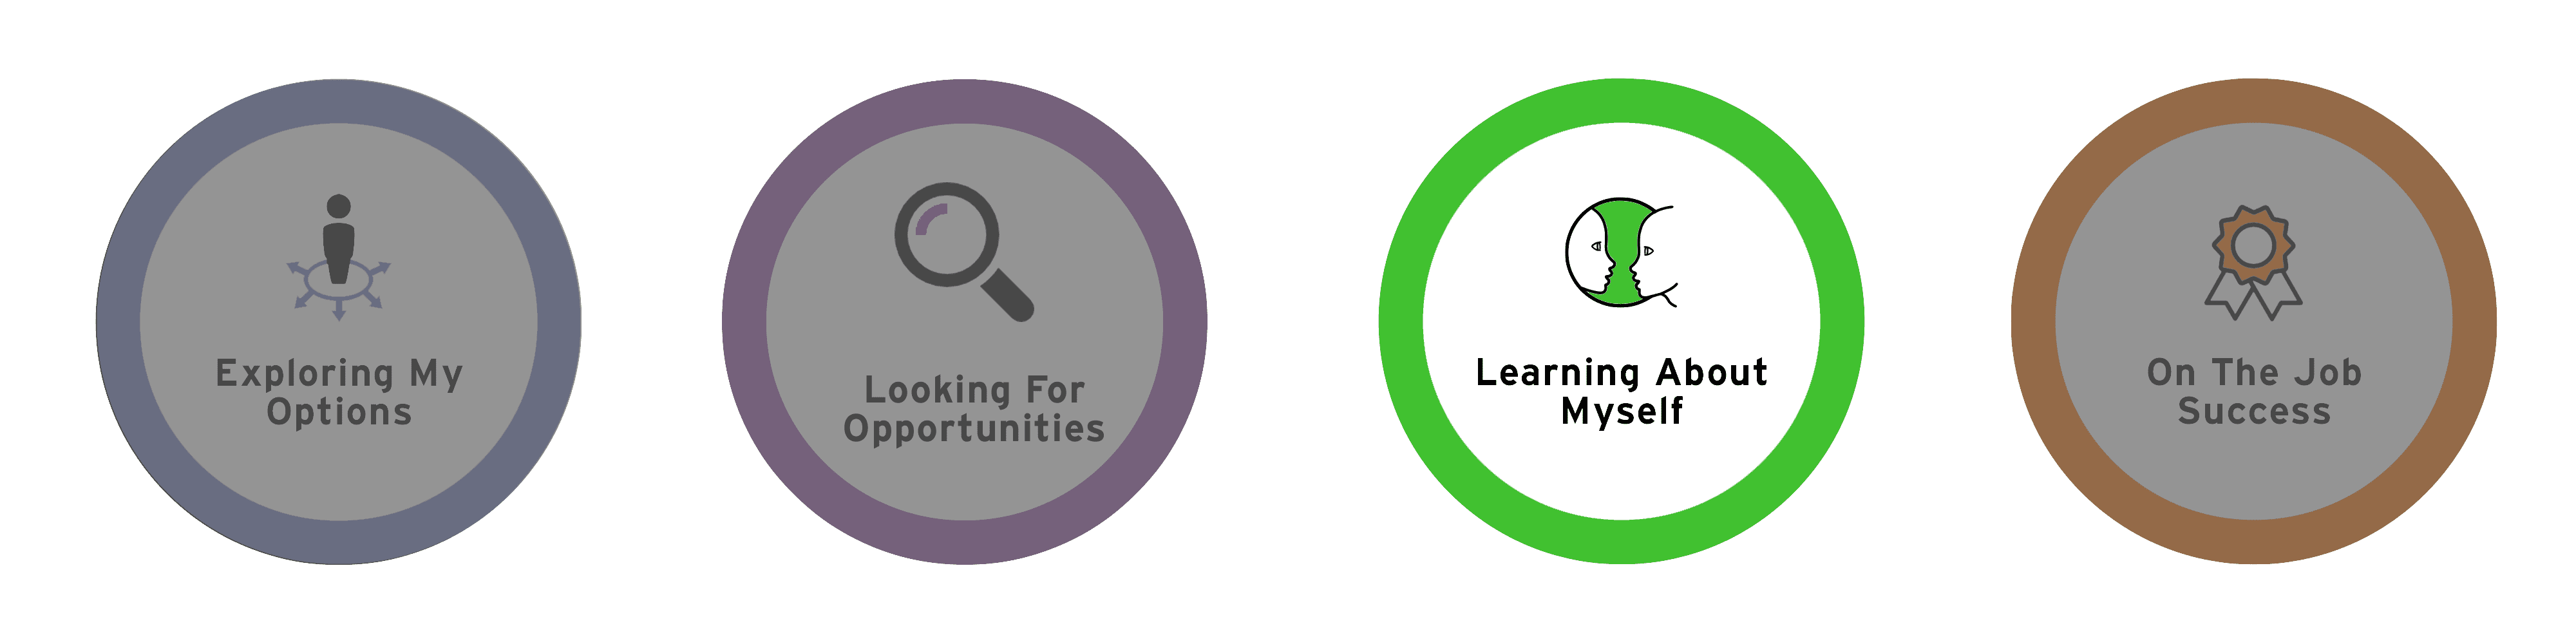 Learning about myself - My Career Plan